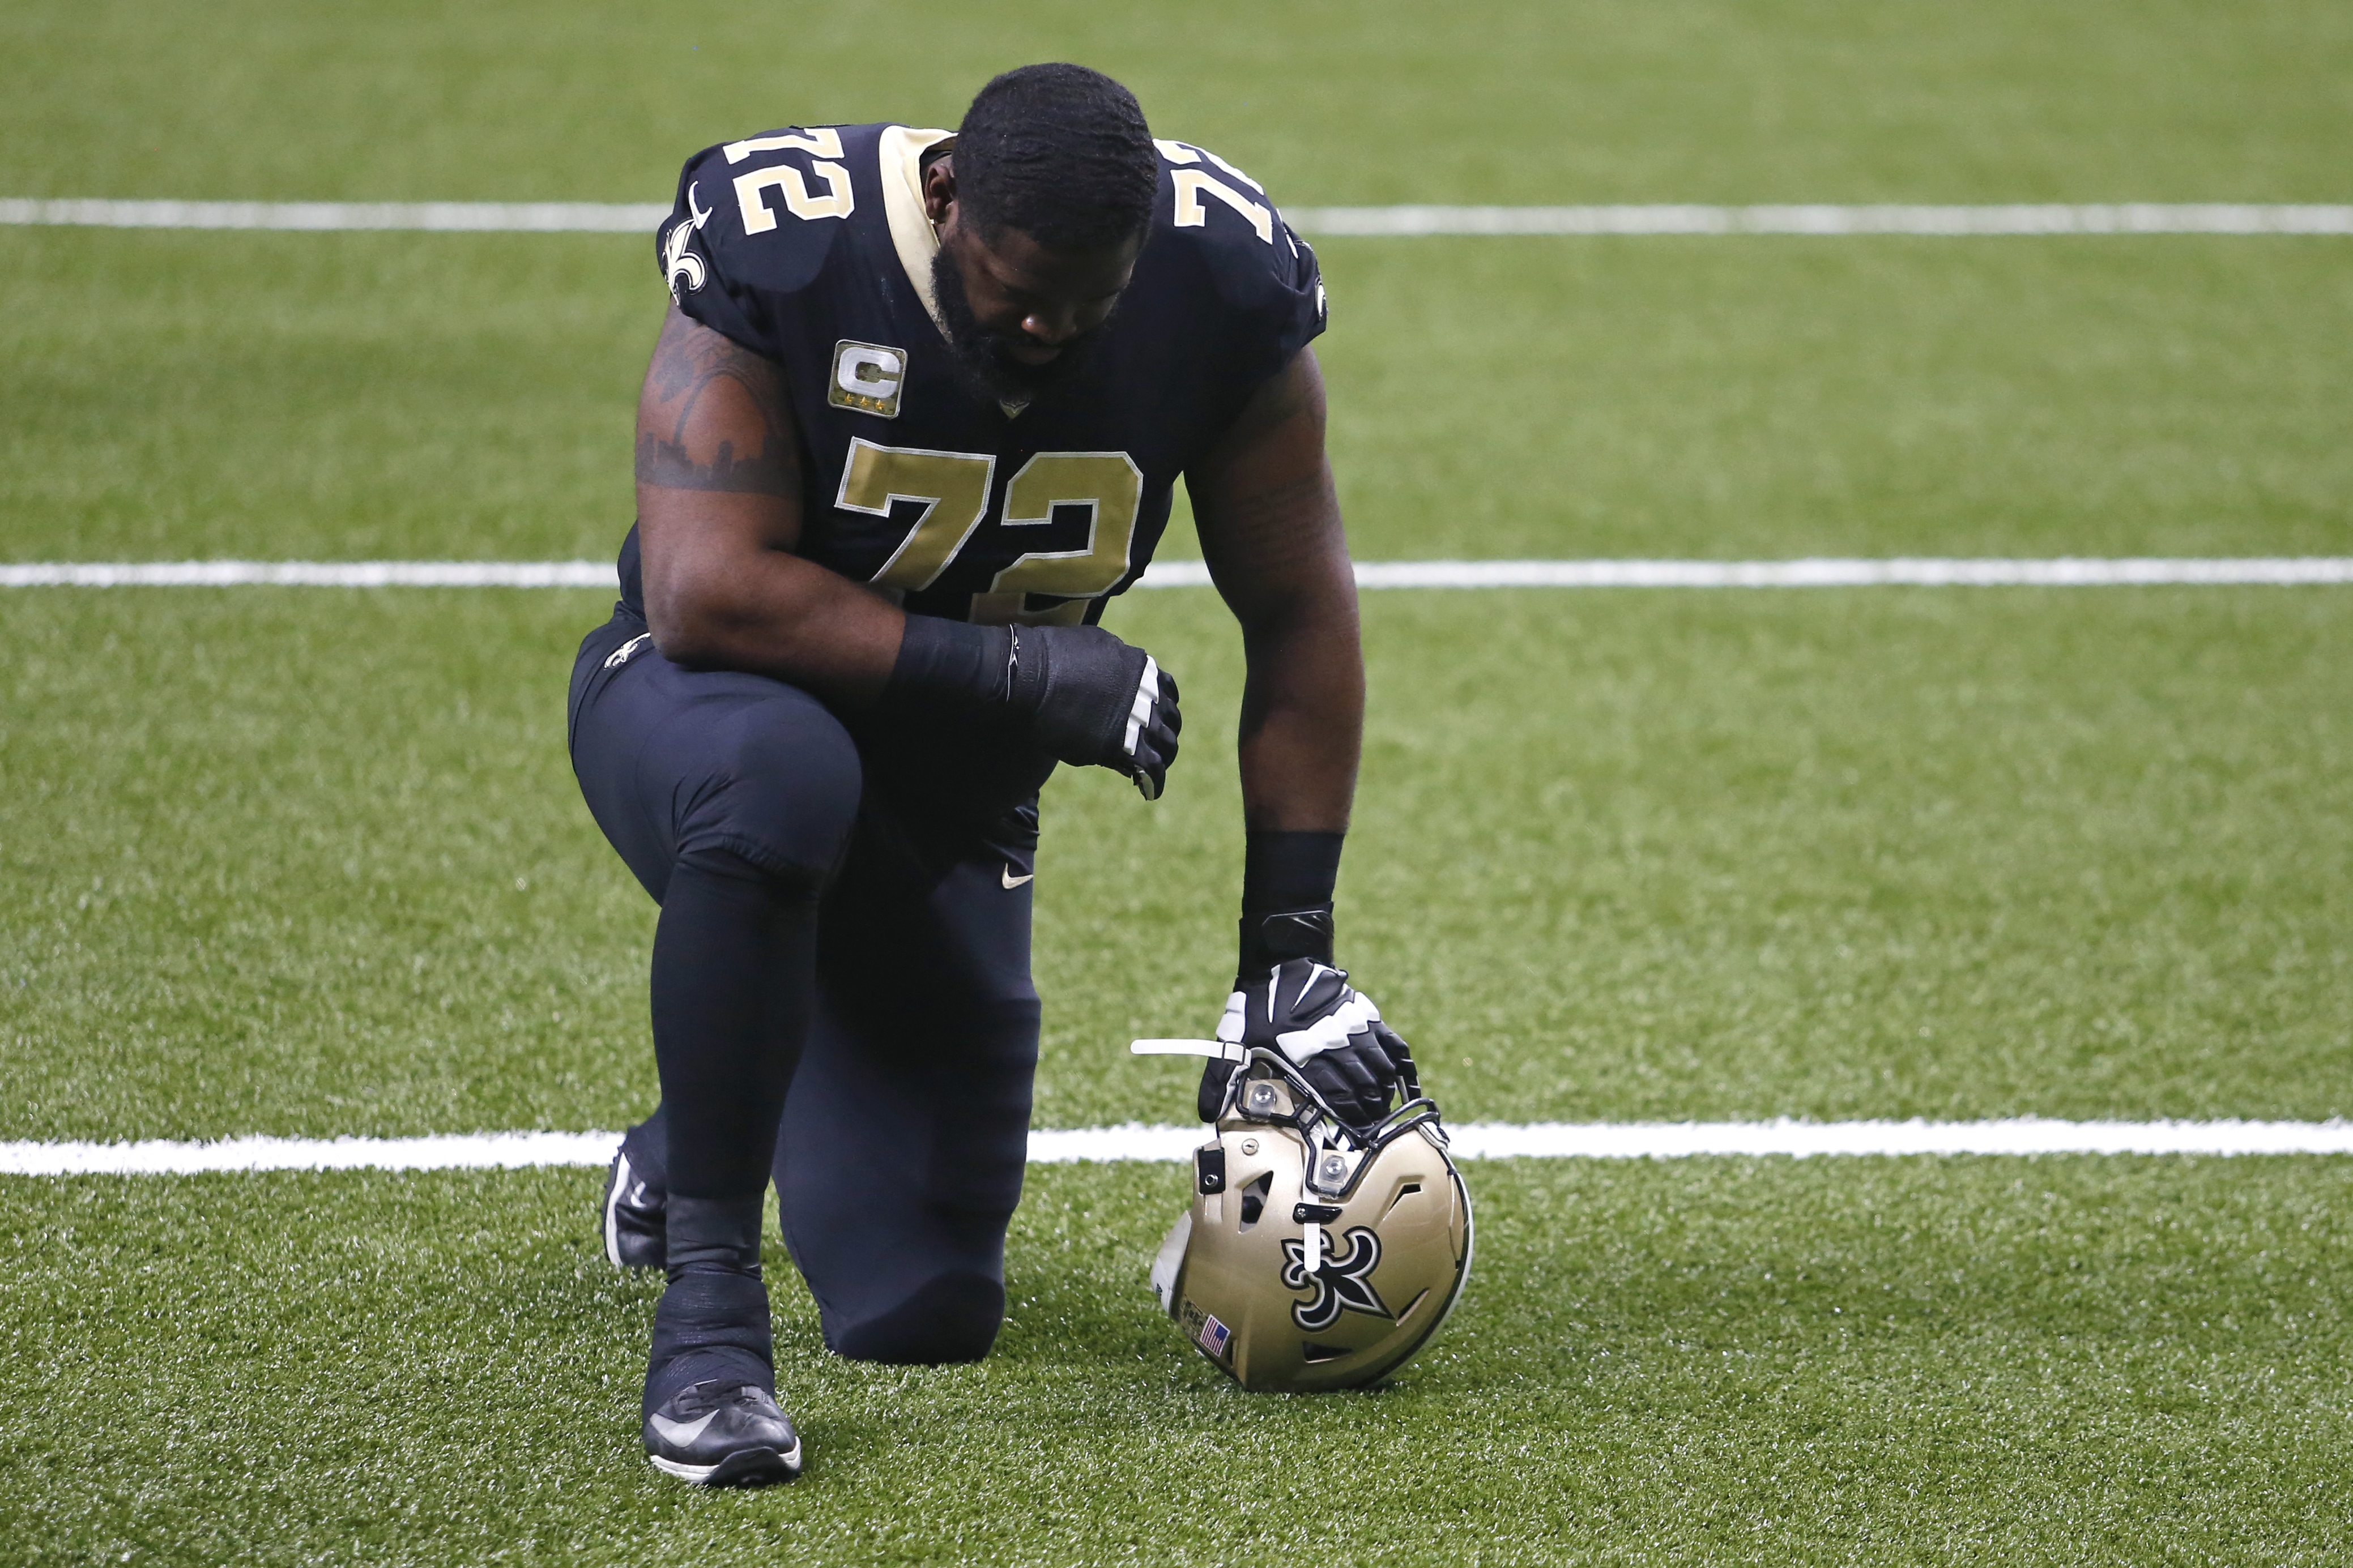 REPORT: New Orleans Saints player tests positive for COVID-19 on